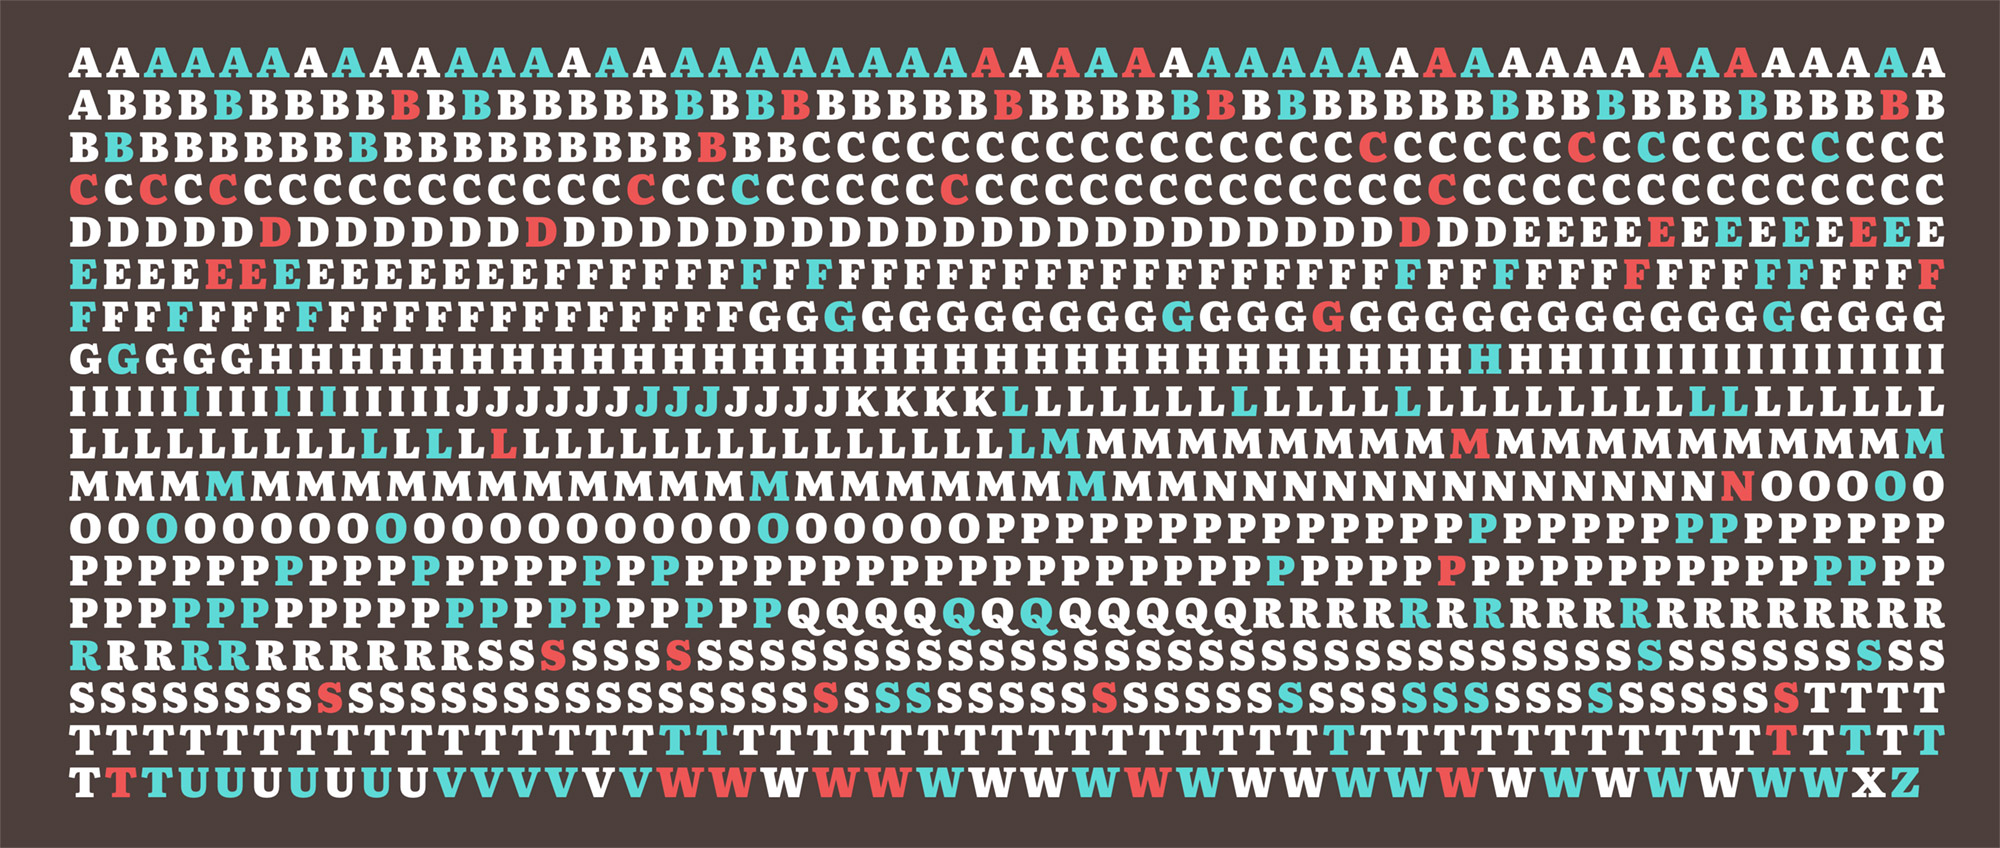 Letters of the alphabet repeated for each term